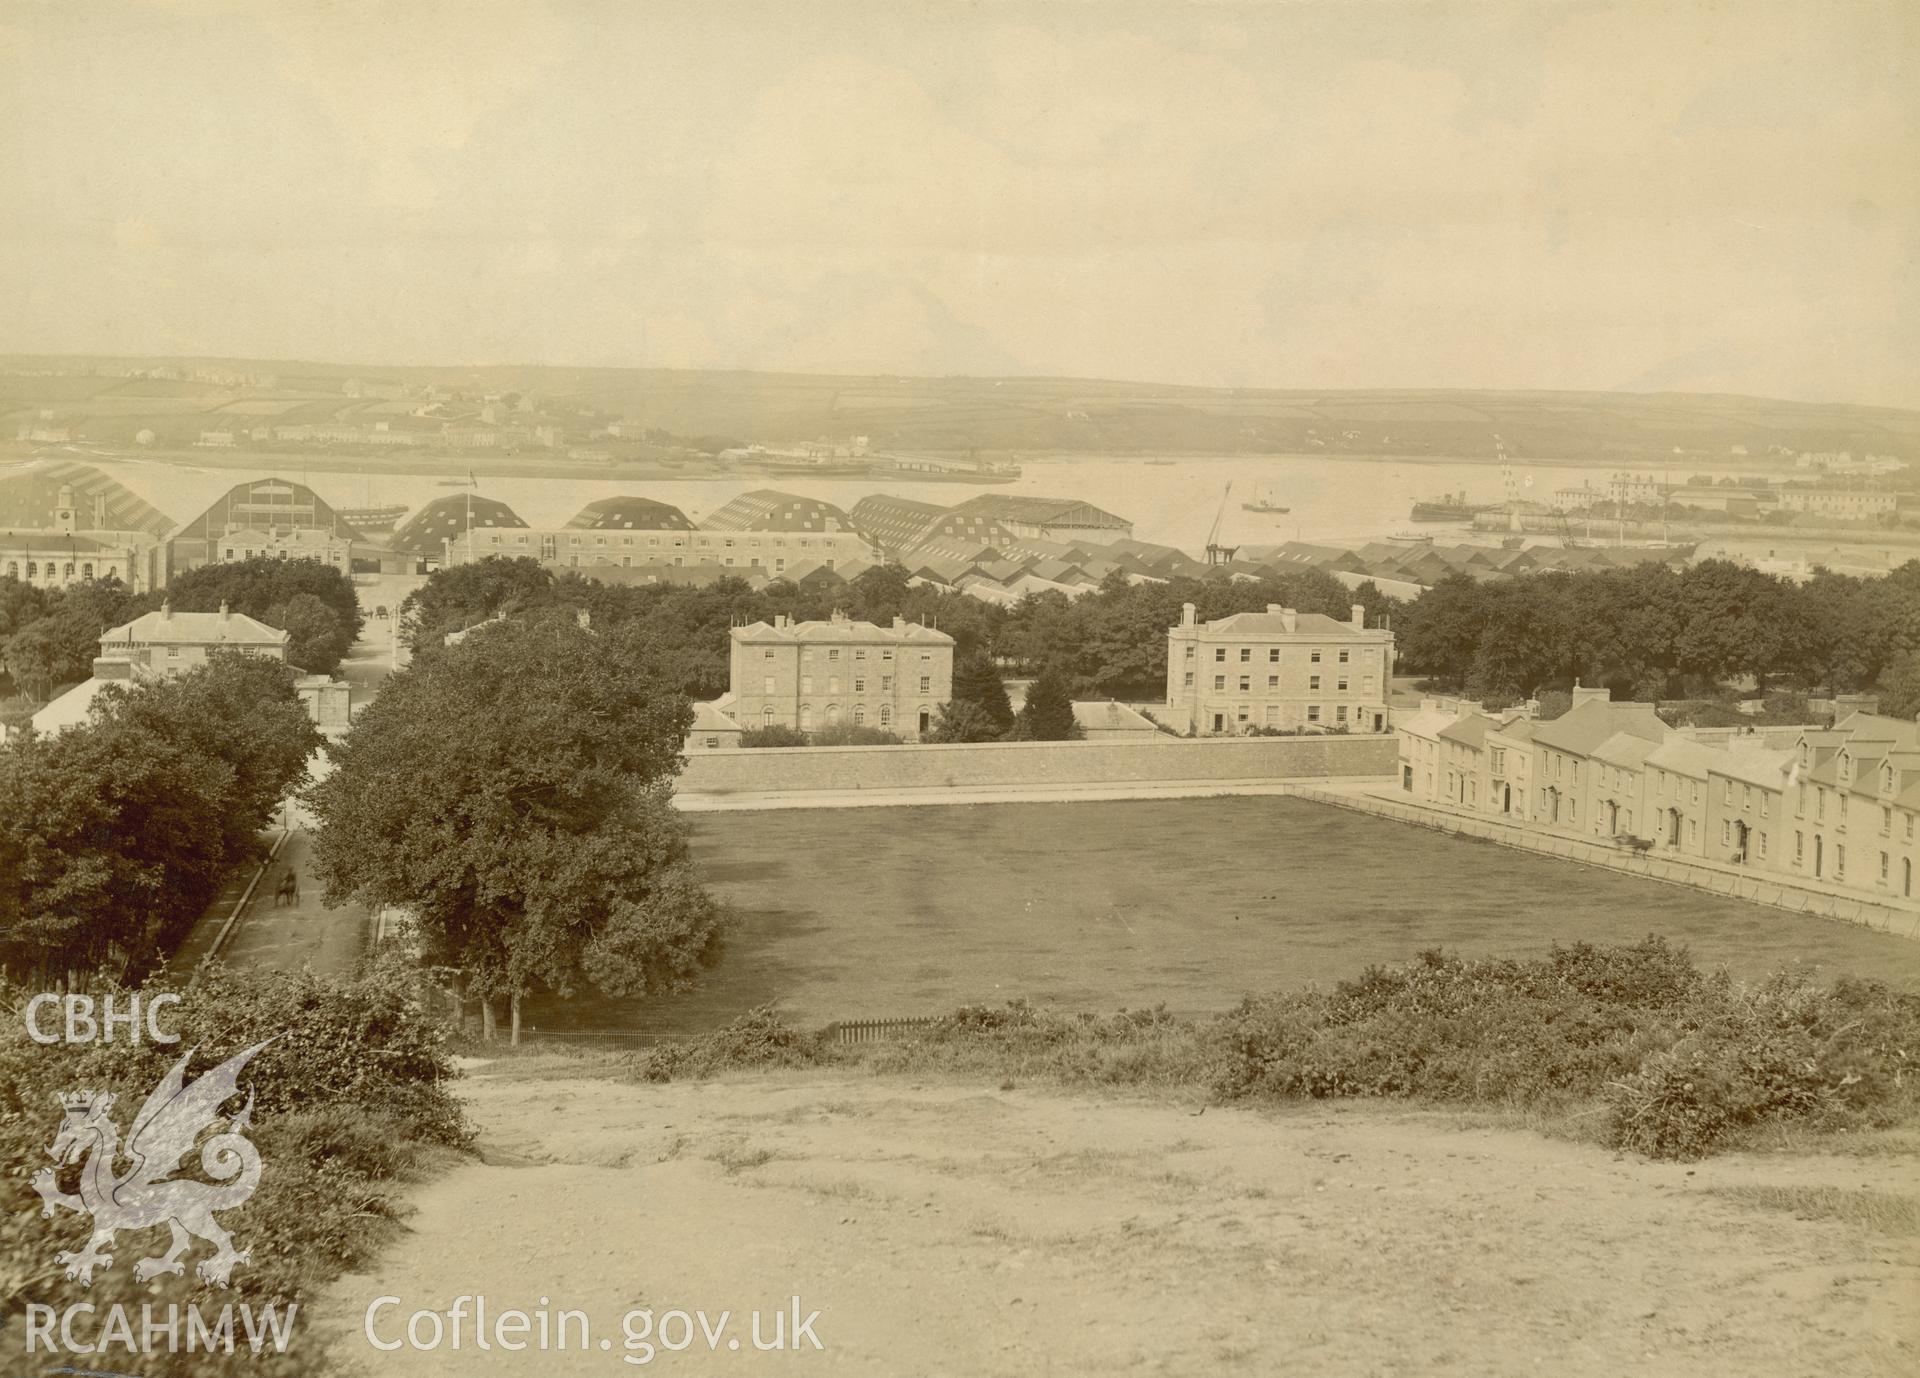 Digital copy of an albumen print showing general view over Pembroke Dock, date and photographer unknown.